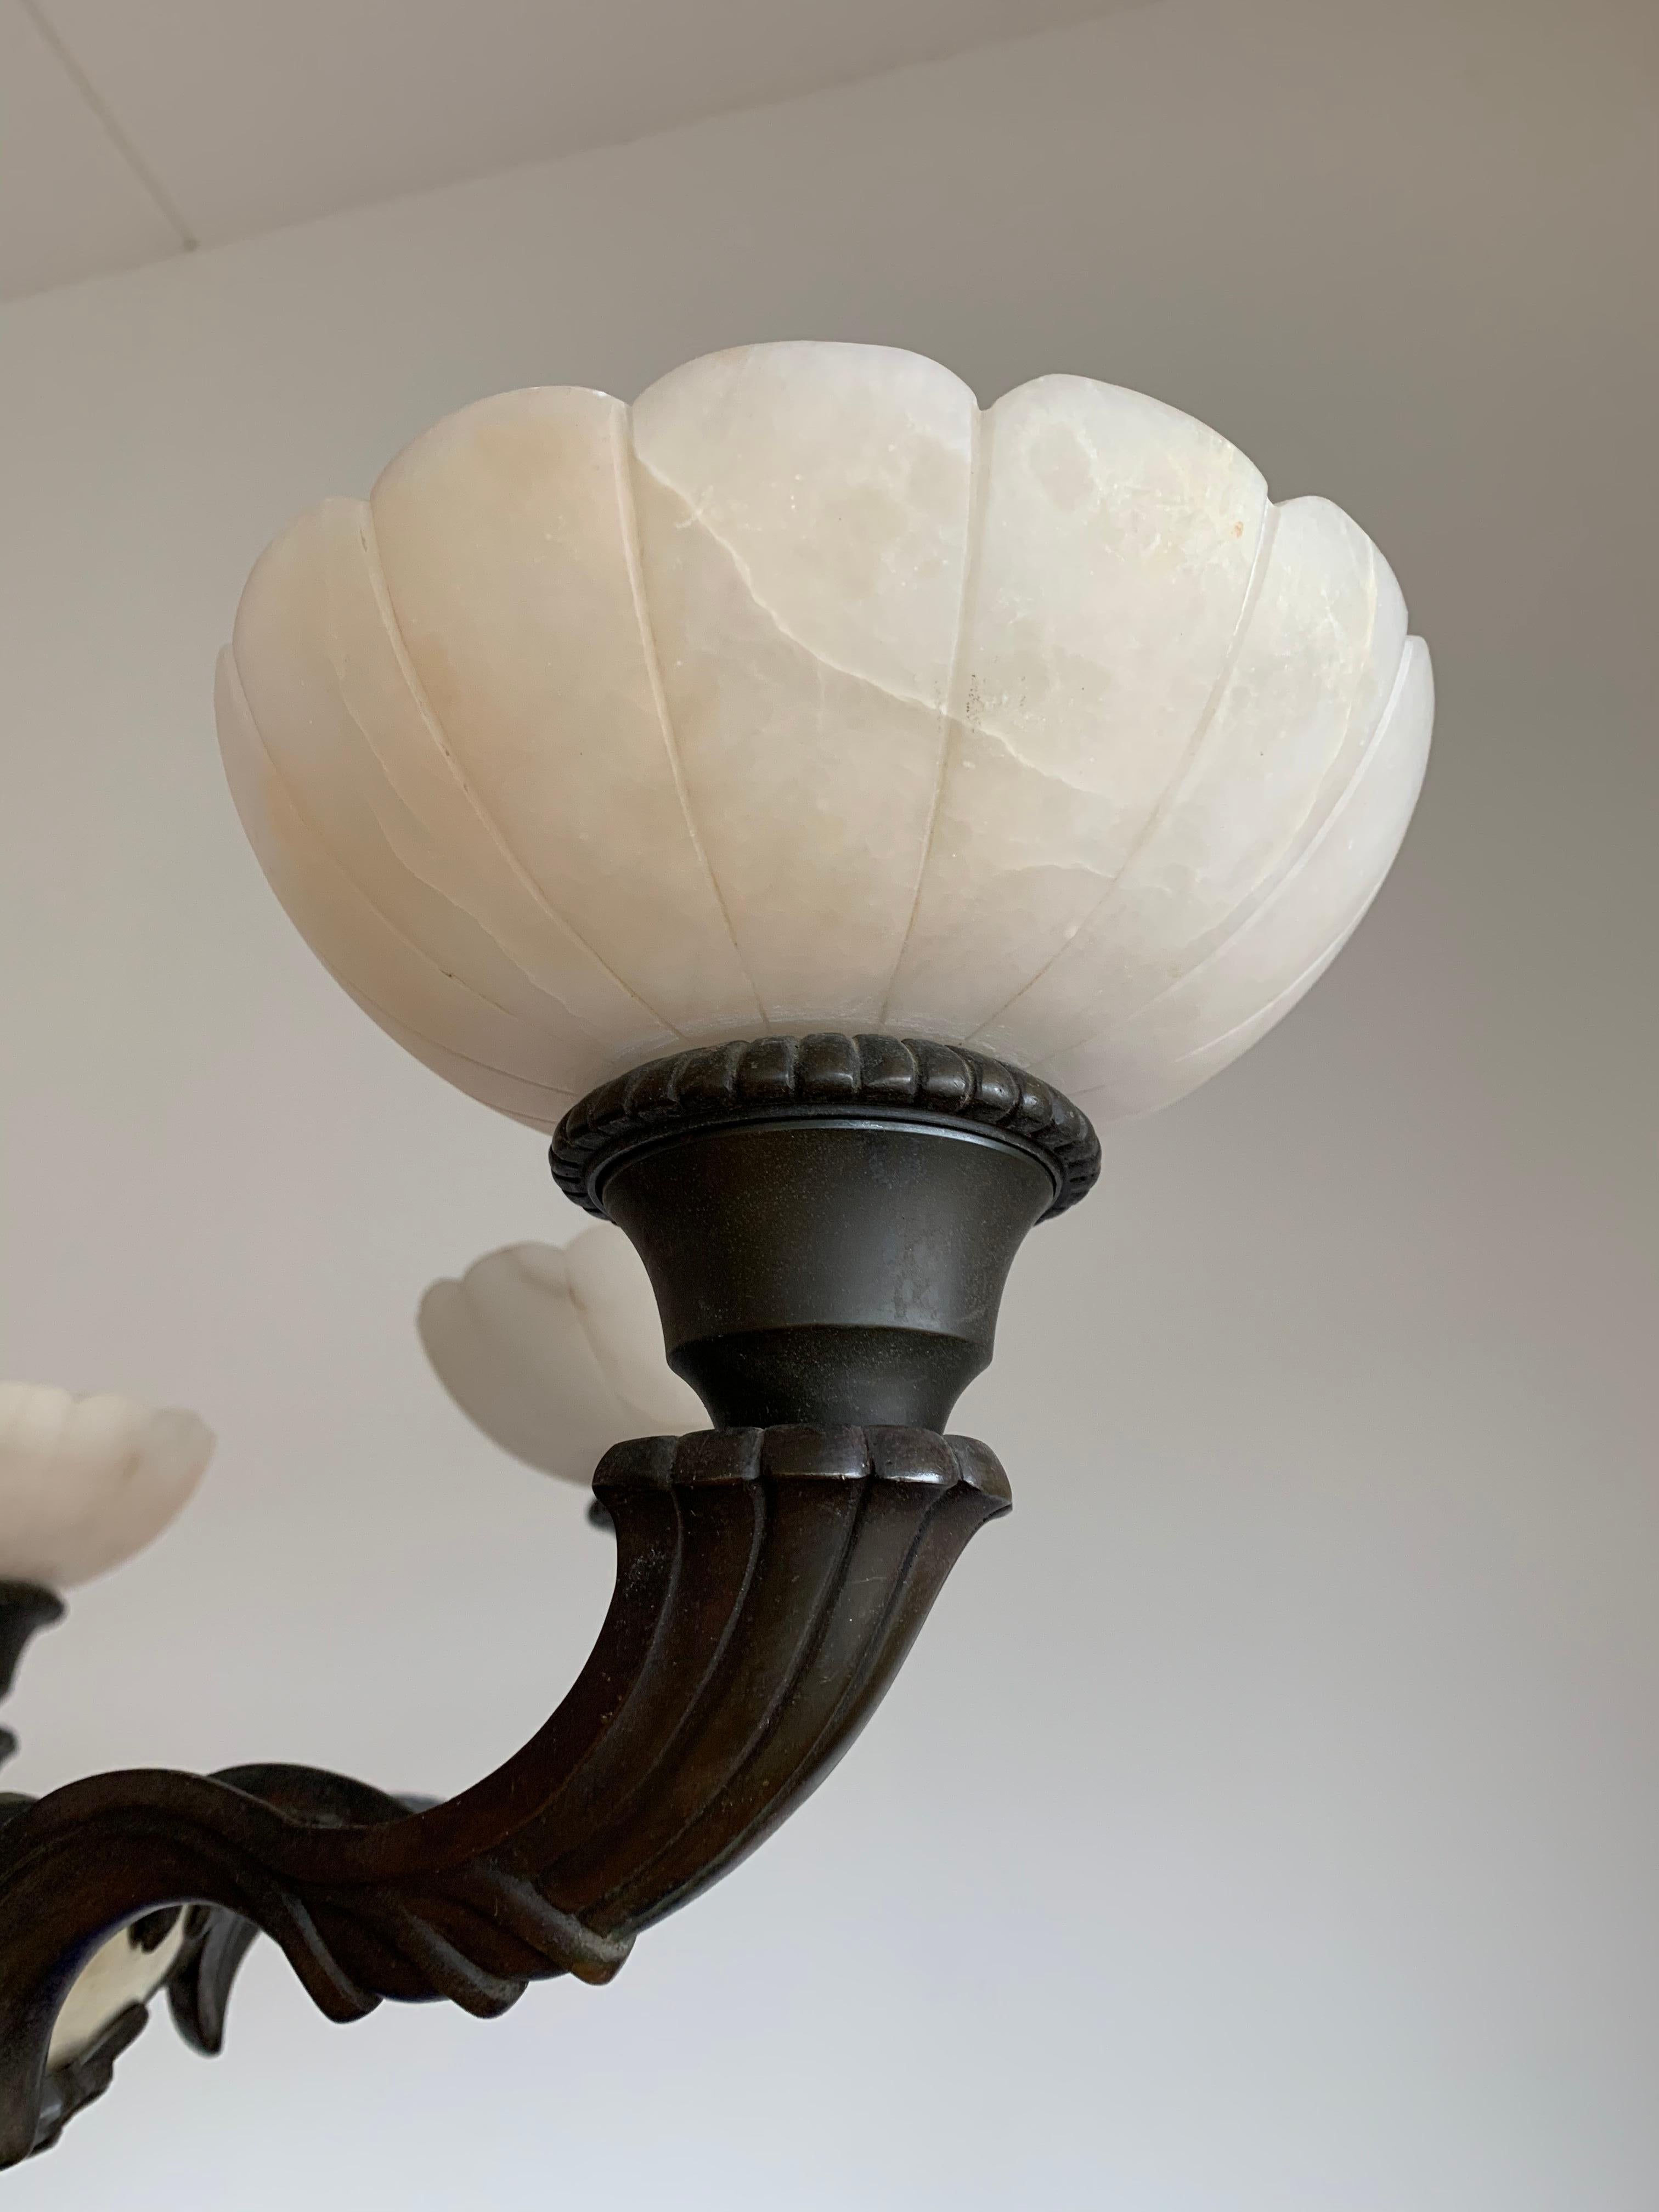 Stylish 1920s Art Deco White Alabaster and Bronze Arms Chandelier Light Fixture 9